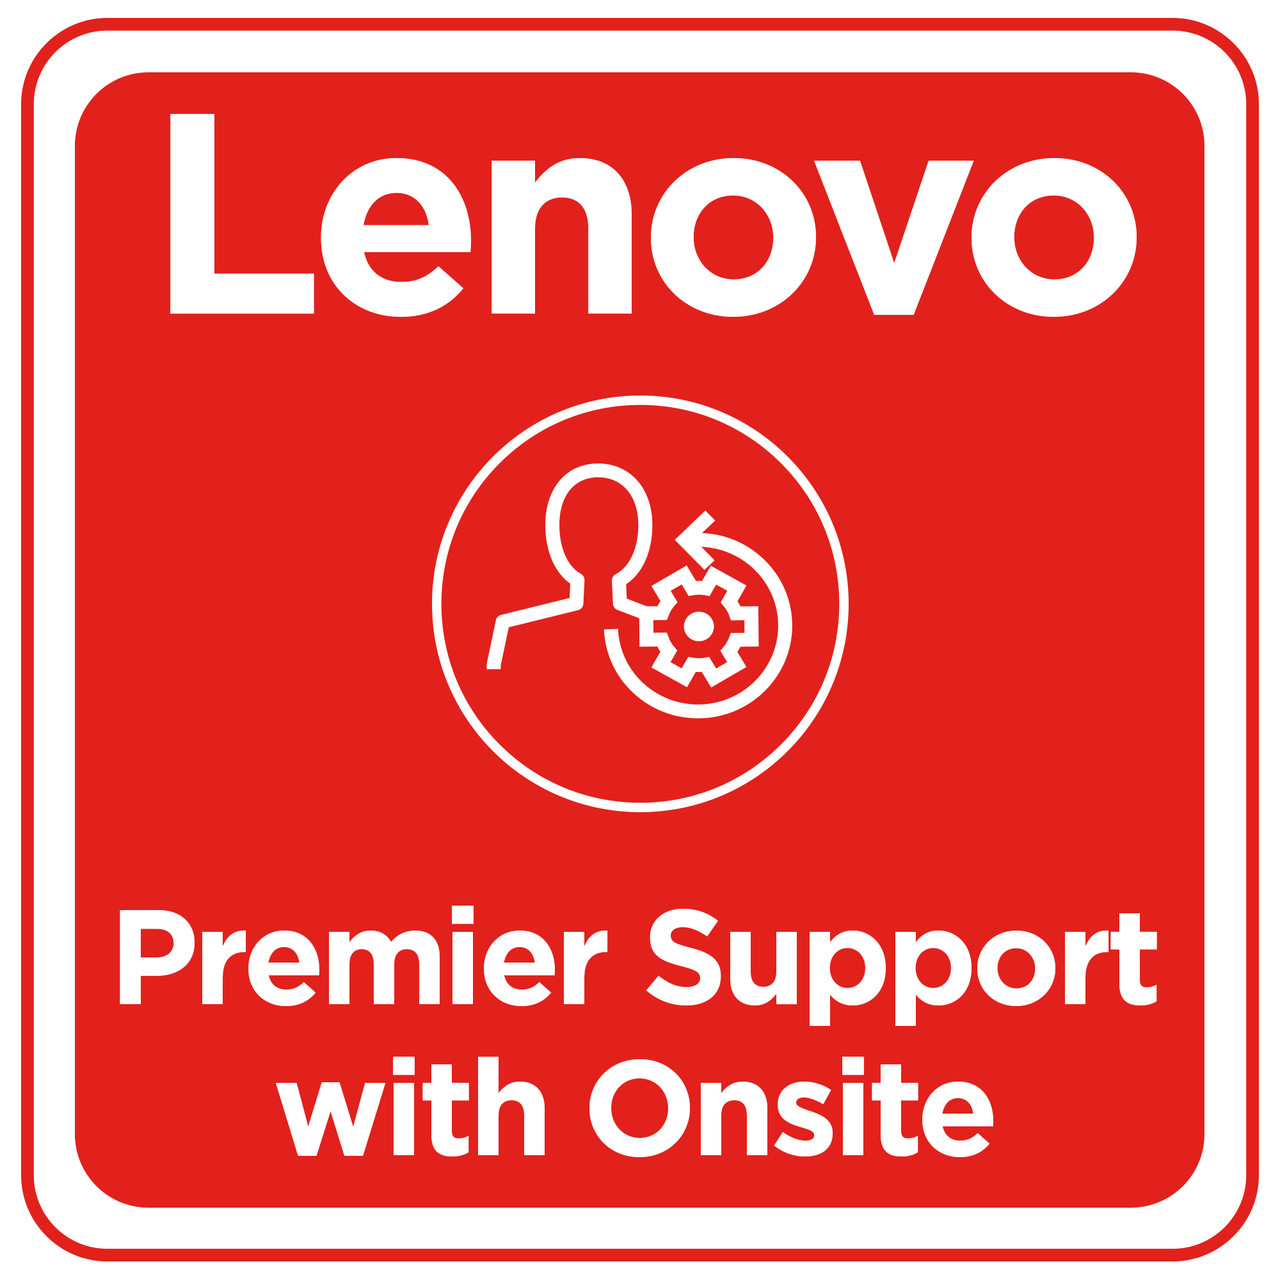 Lenovo Premier Support with Onsite NBD, Extended service agreement, parts and labour, 5 years, on-site, response time: NBD, for ThinkCentre Edge 93z; ThinkCentre M910z; M920z AIO; X1